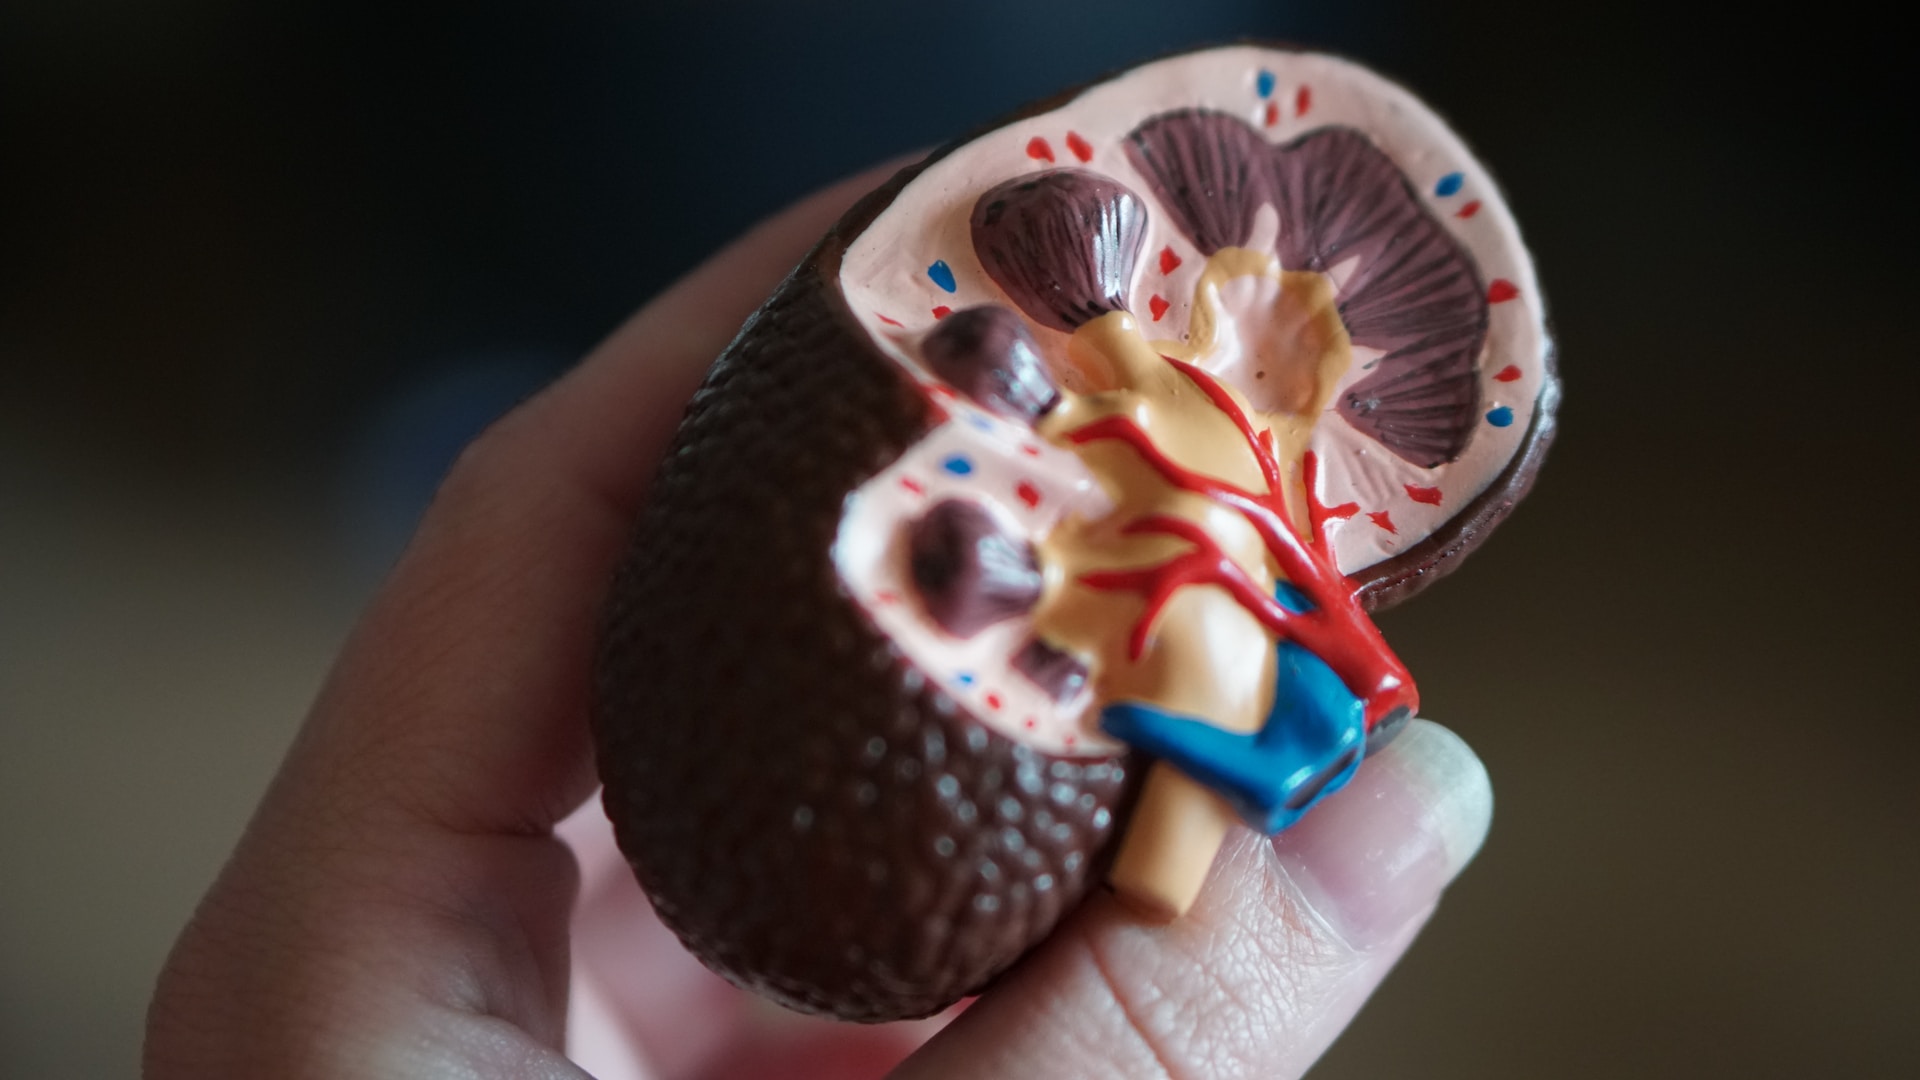 kidney anatomy model held in hand featured image on article How Long Does a UTI Last published on healthy n better living